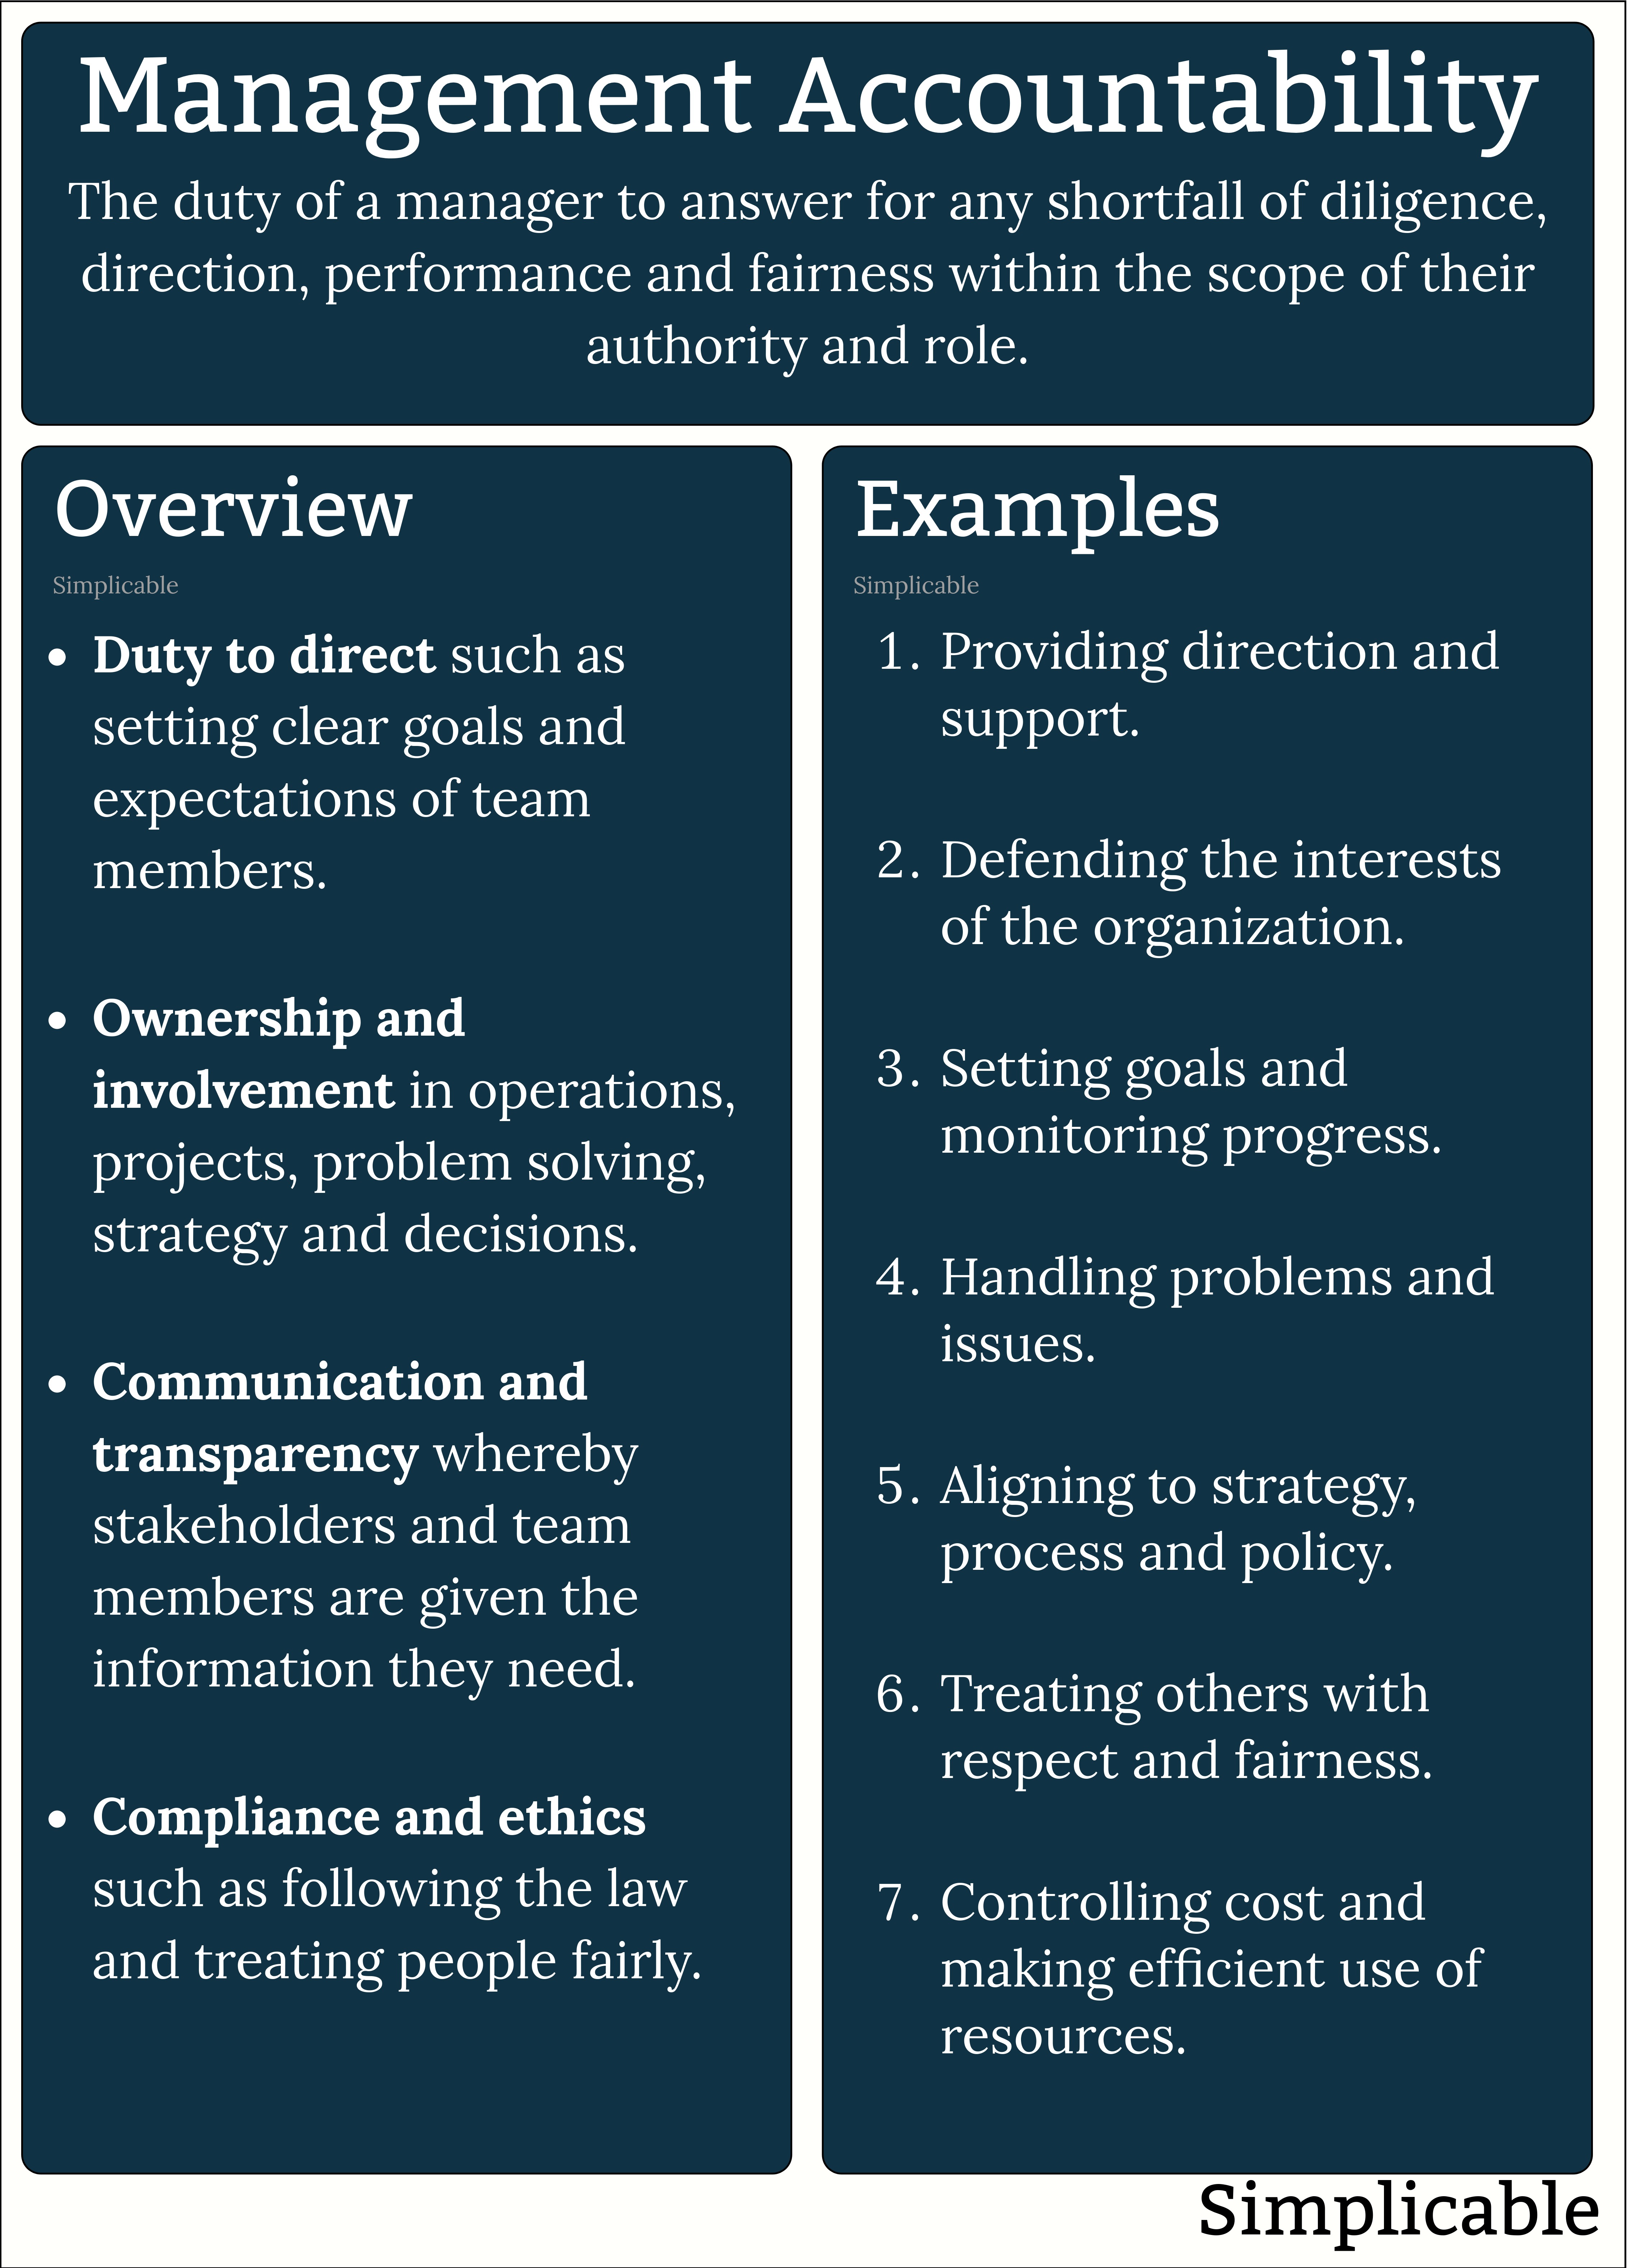 management accountability overview and examples